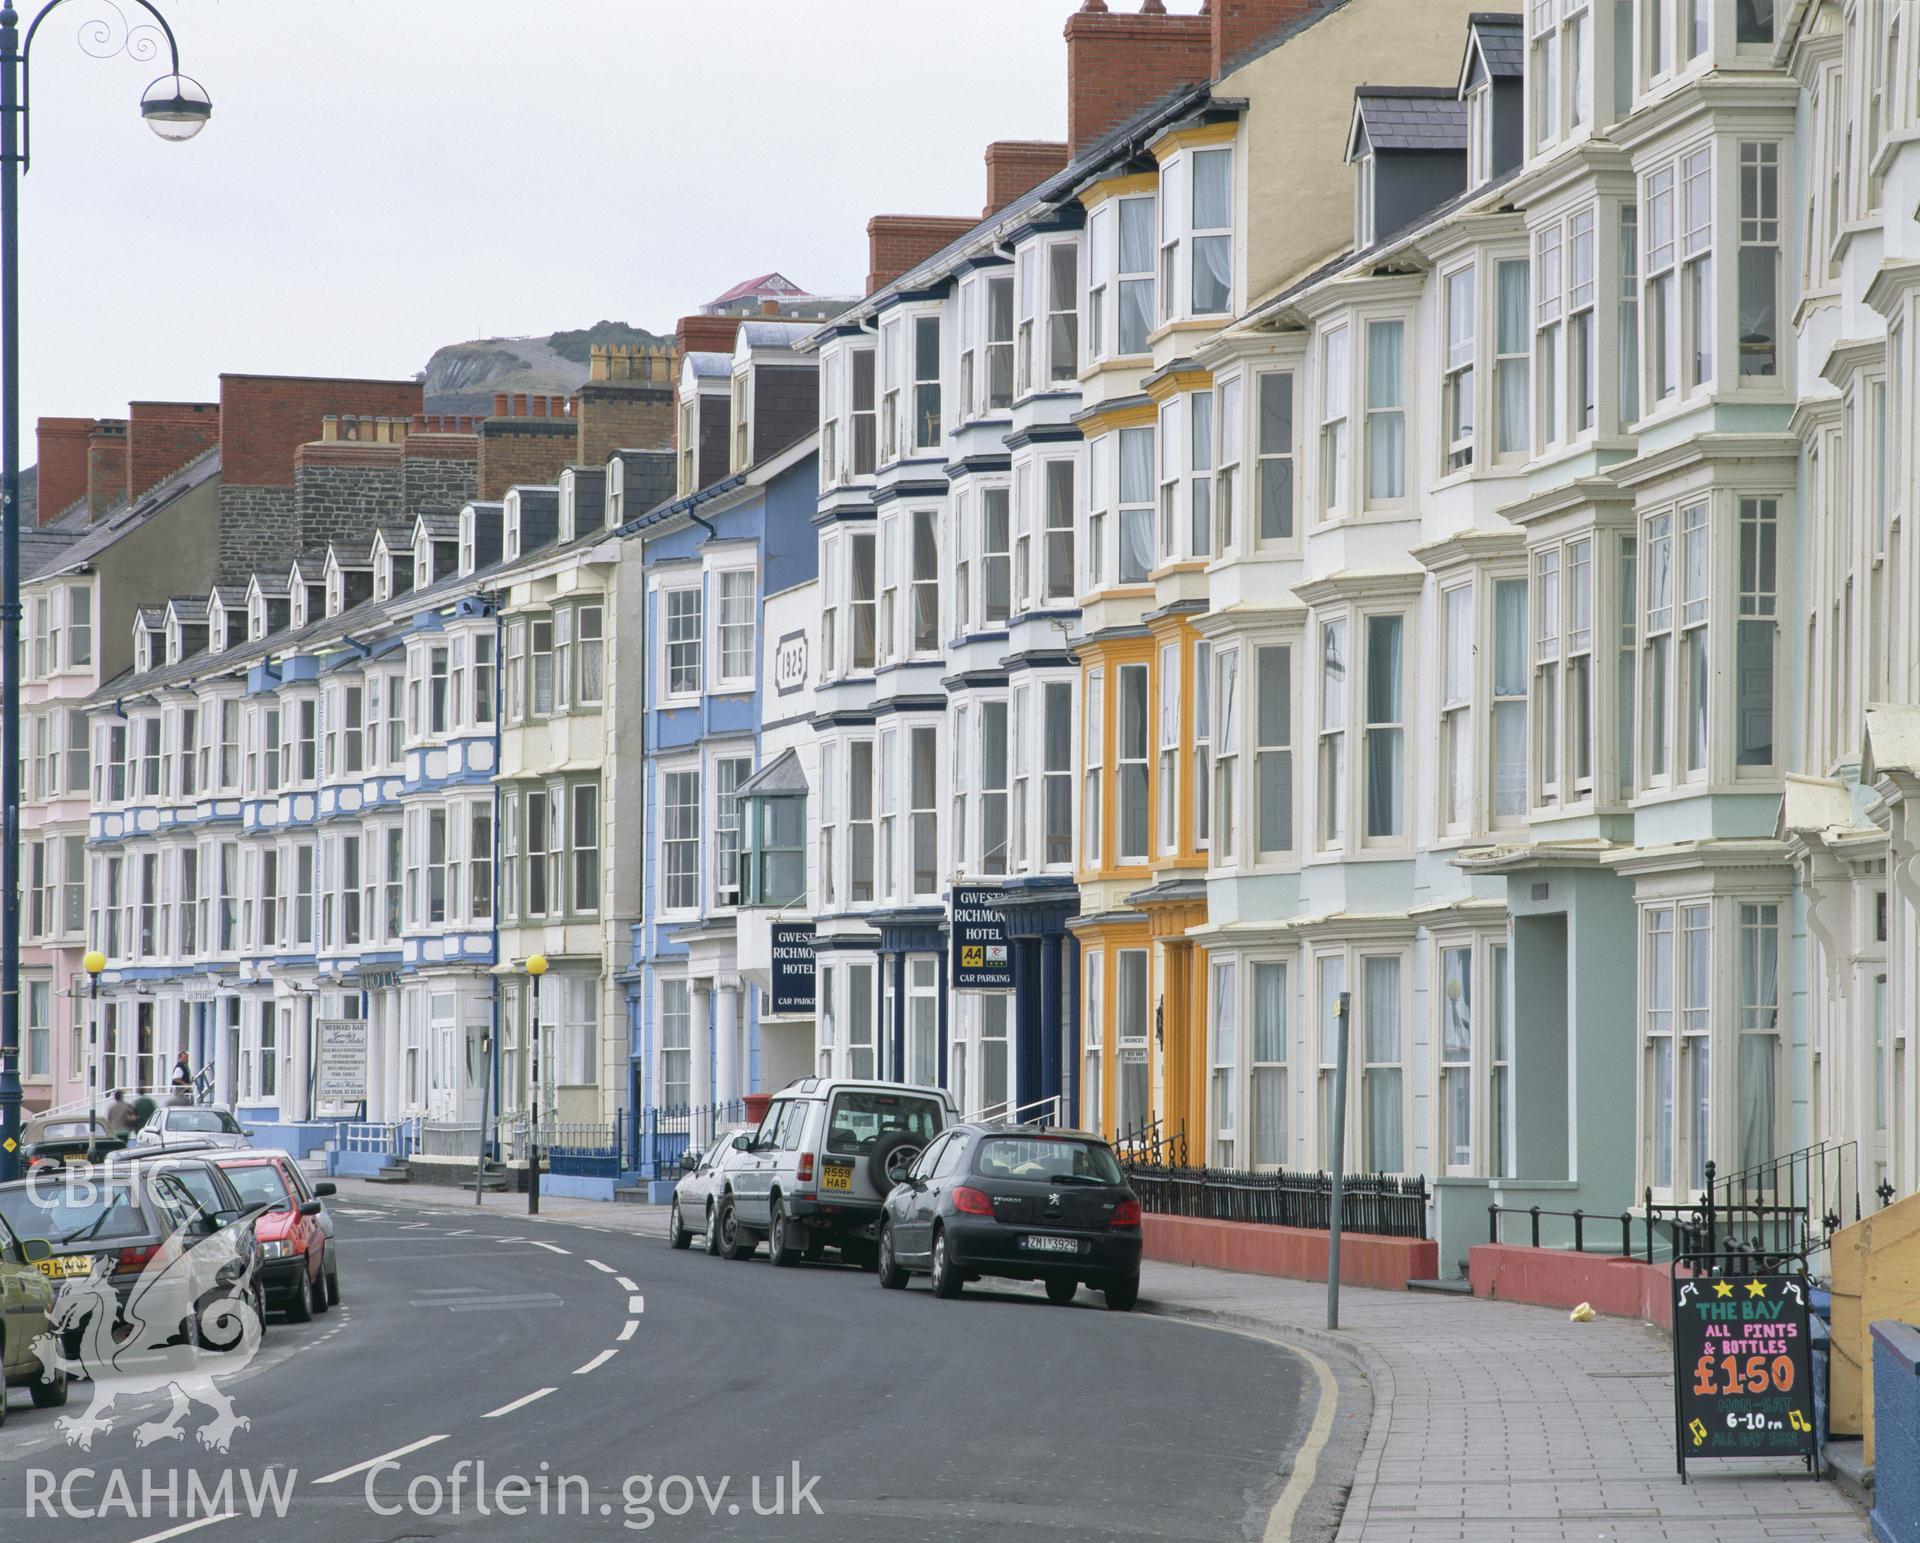 Colour transparency showing view of Marine Terrace, Aberystwyth, produced by Iain Wright, June 2004